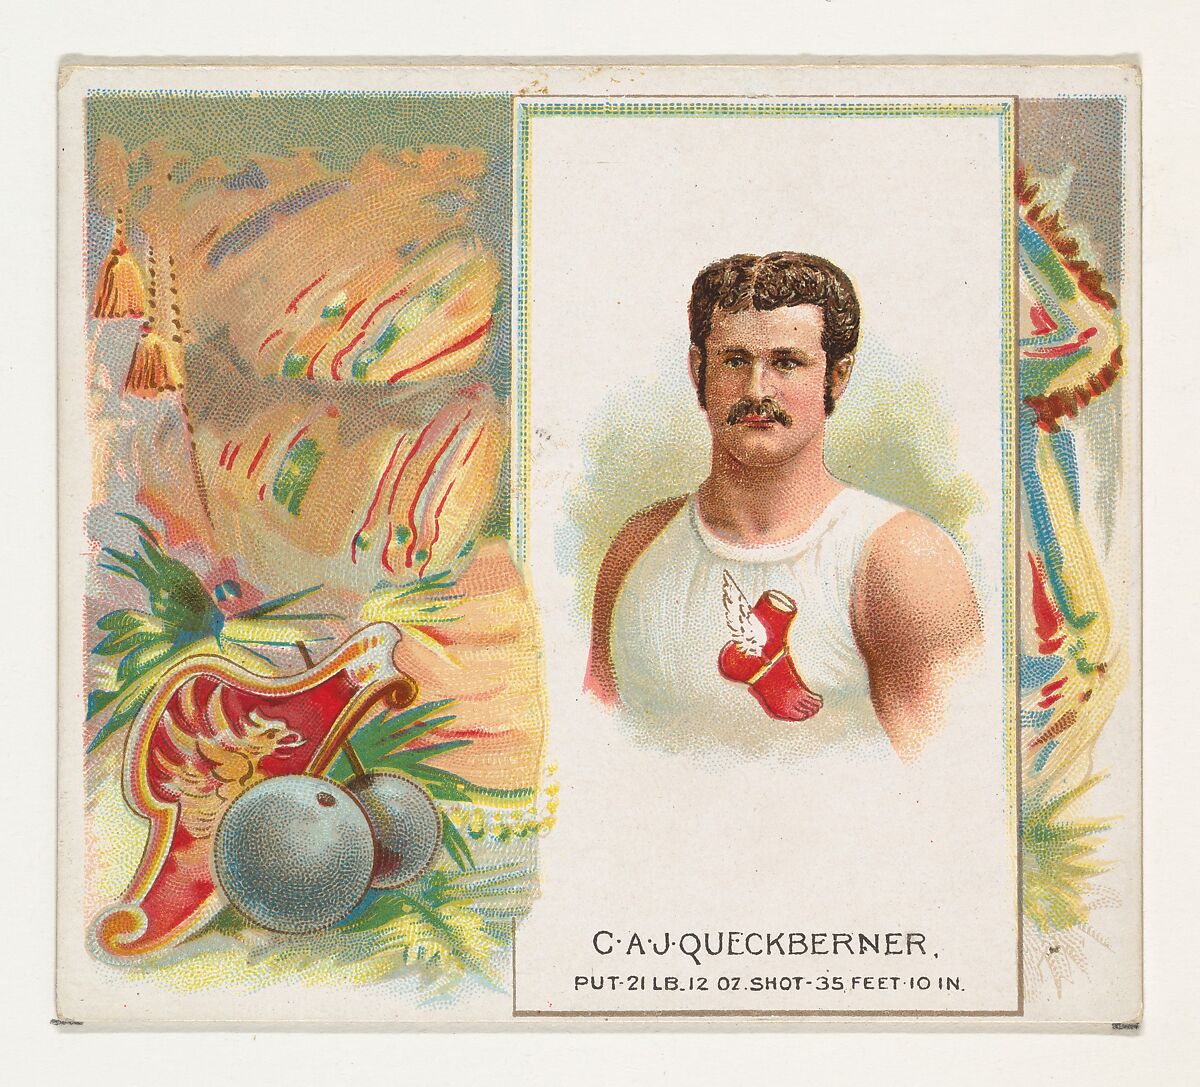 C.A.J. Queckberner, Shot Put, from World's Champions, Second Series (N43) for Allen & Ginter Cigarettes, Allen &amp; Ginter (American, Richmond, Virginia), Commercial lithograph 